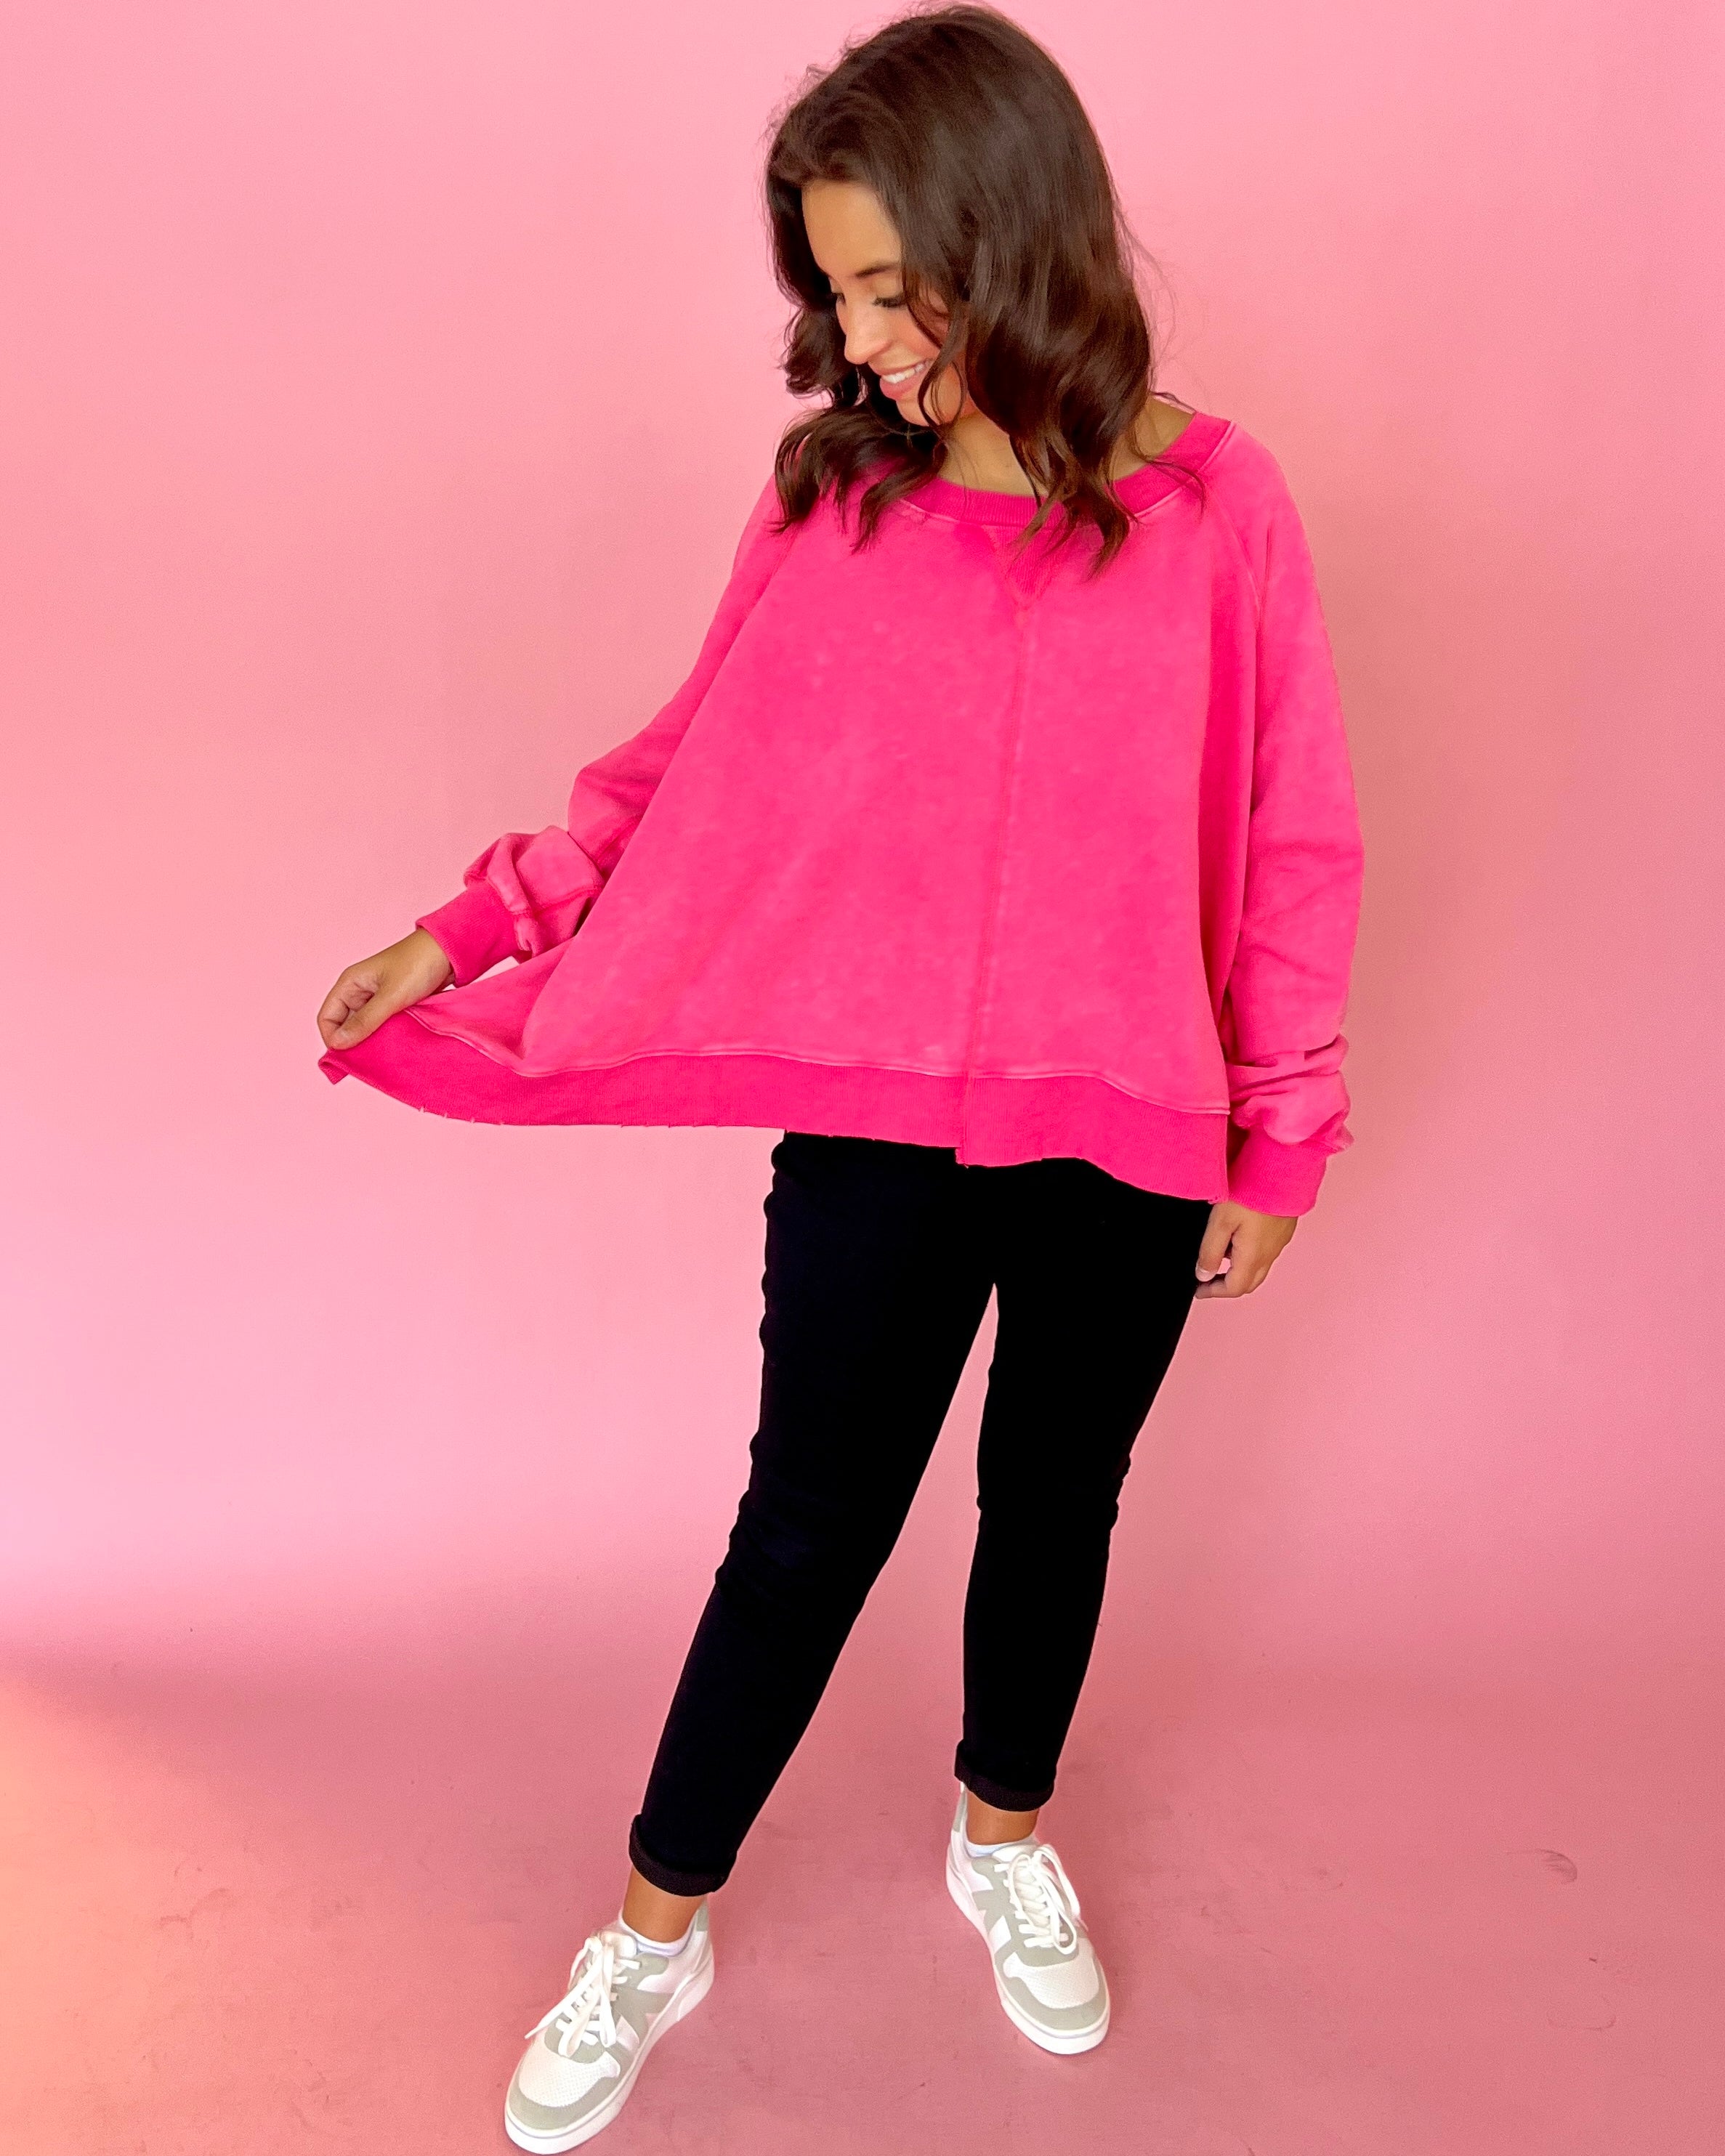 Always There For You Hot Pink Distressed Sweatshirt-Shop-Womens-Boutique-Clothing